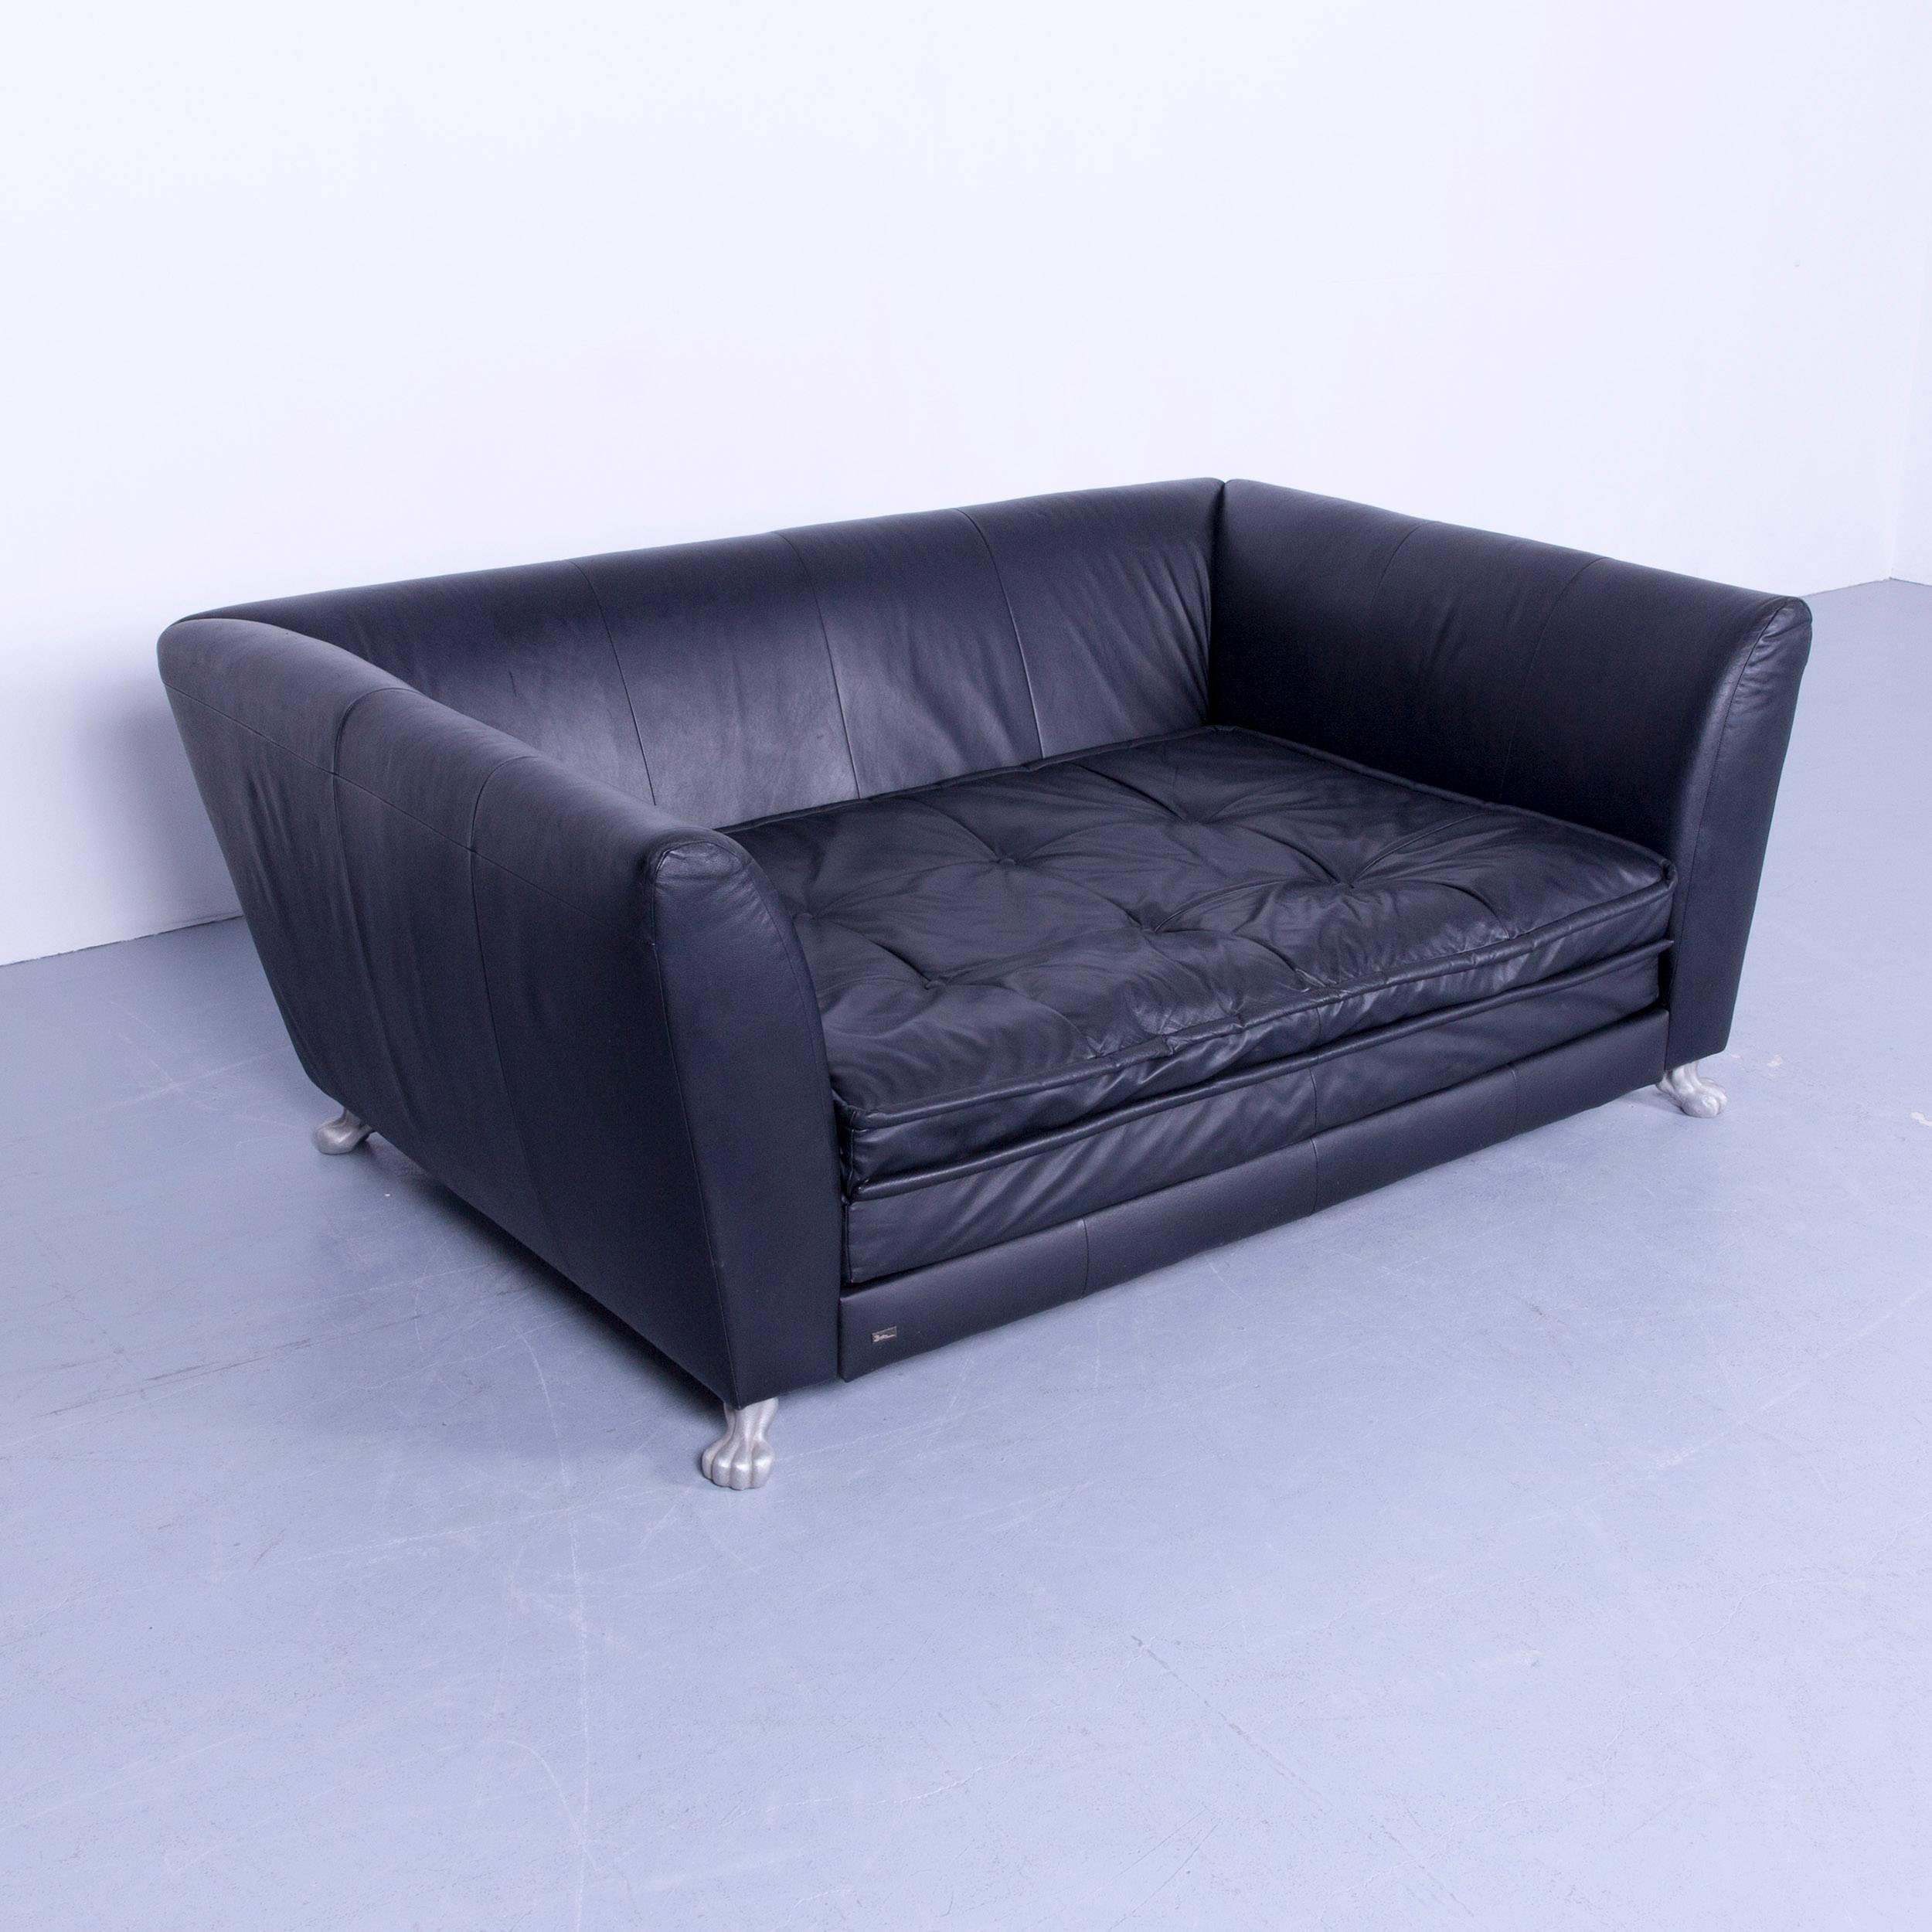 Black colored original Bretz Monster designer sofa in an elegant style, with sleeping function, made for pure comfort.